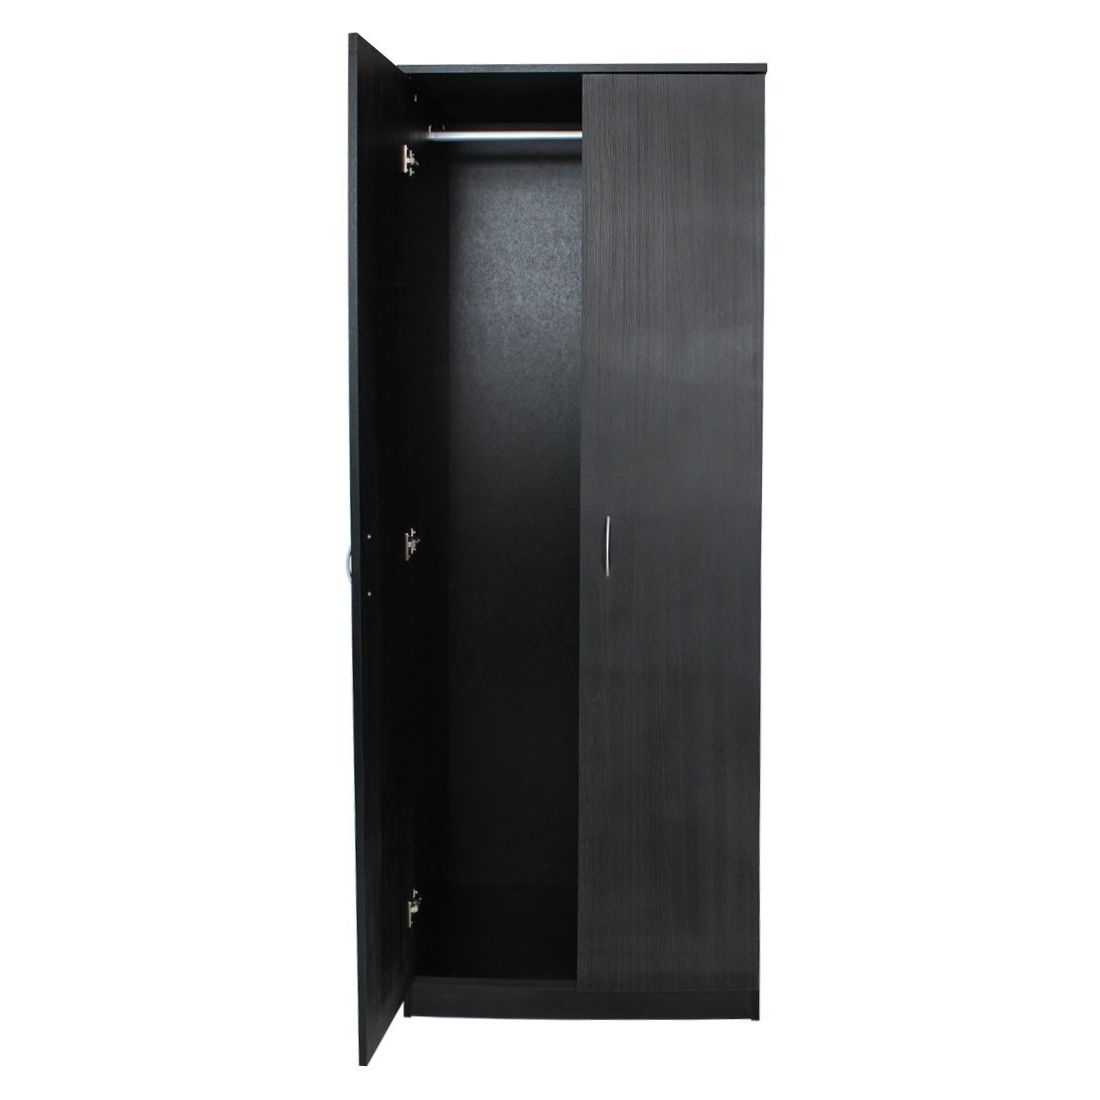 Newest Devoted2home Budget Bedroom Furniture With 2 Door Wardrobe, Wood Regarding Black Wardrobes With Drawers (View 10 of 15)